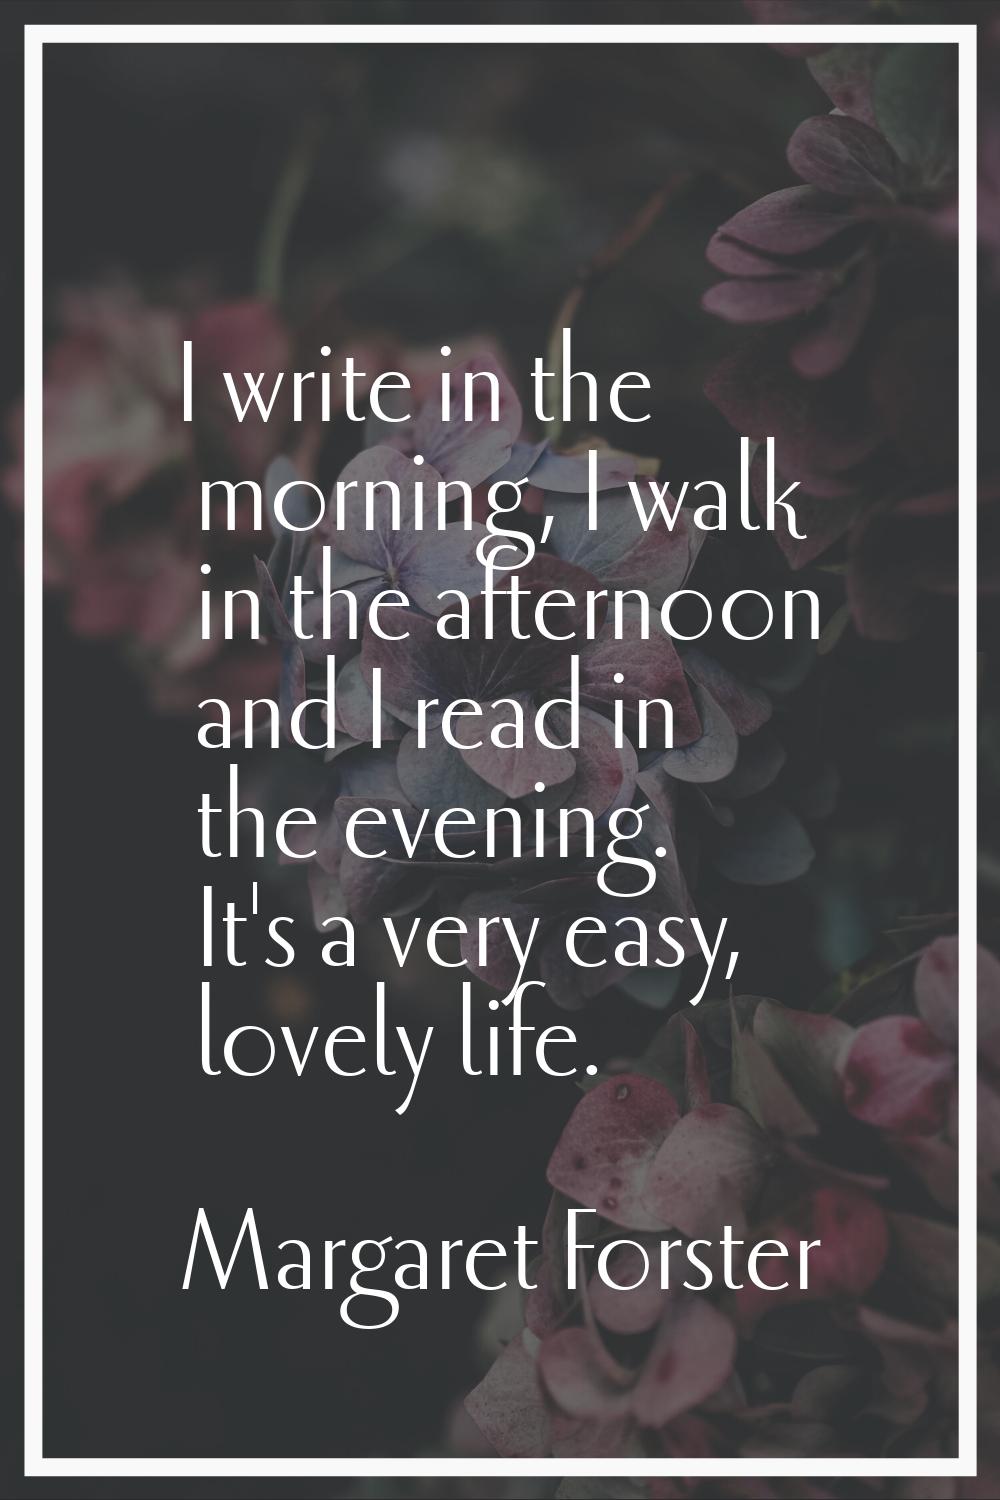 I write in the morning, I walk in the afternoon and I read in the evening. It's a very easy, lovely